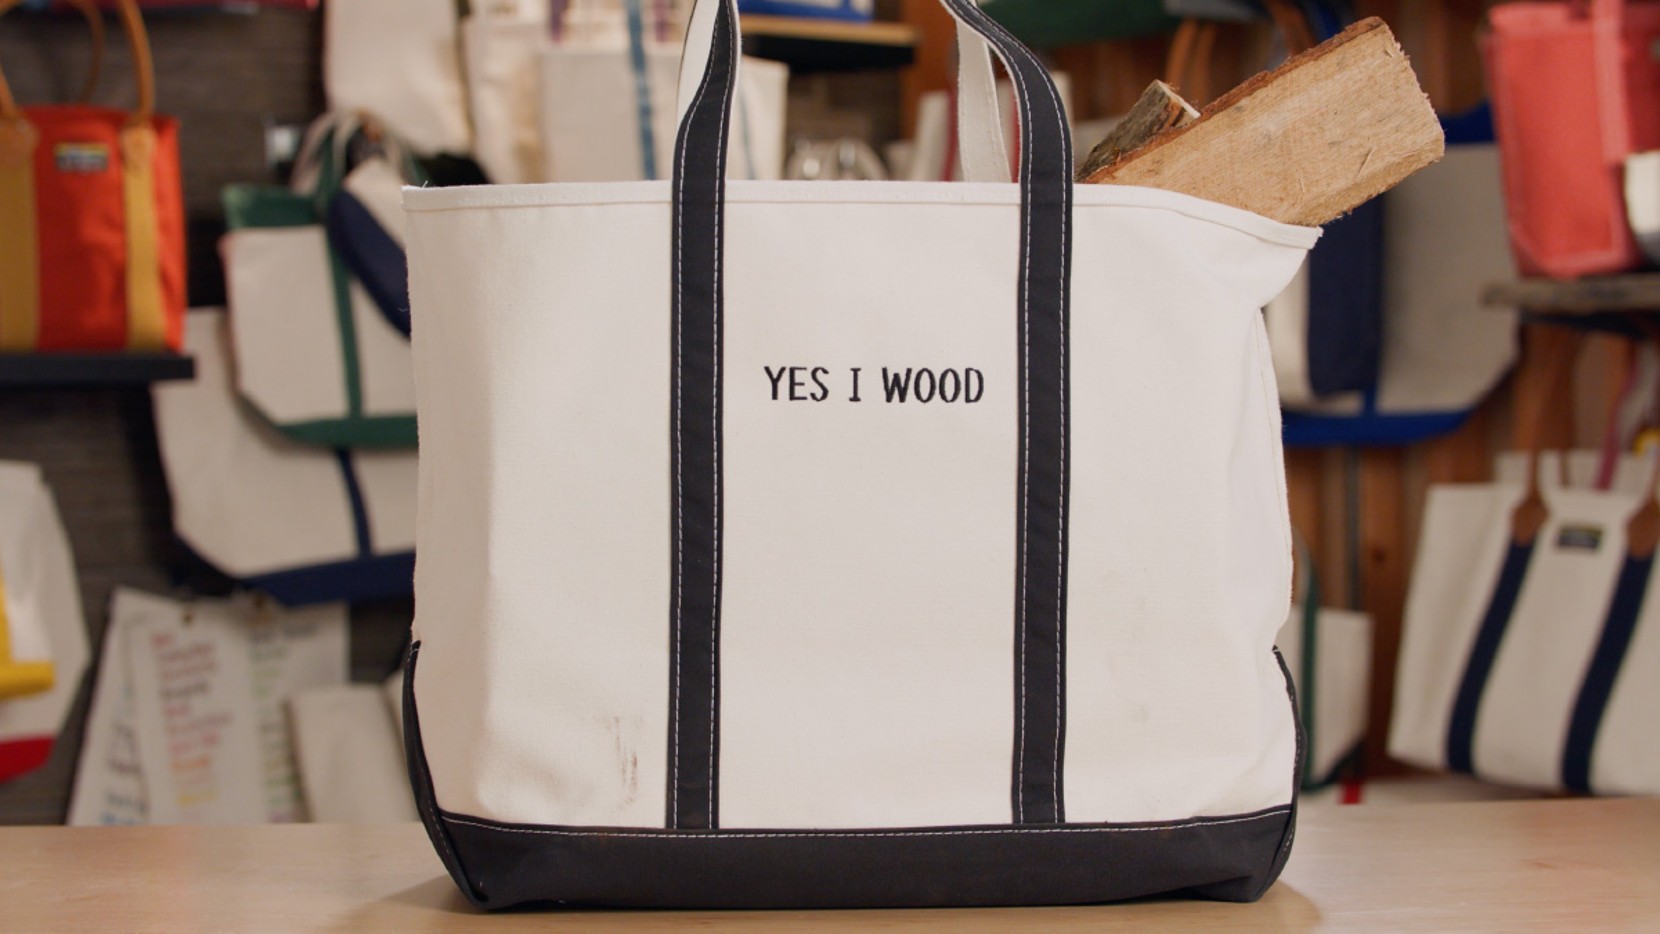 A Boat & Tote with black handles and a black monogram - "YES I WOOD"